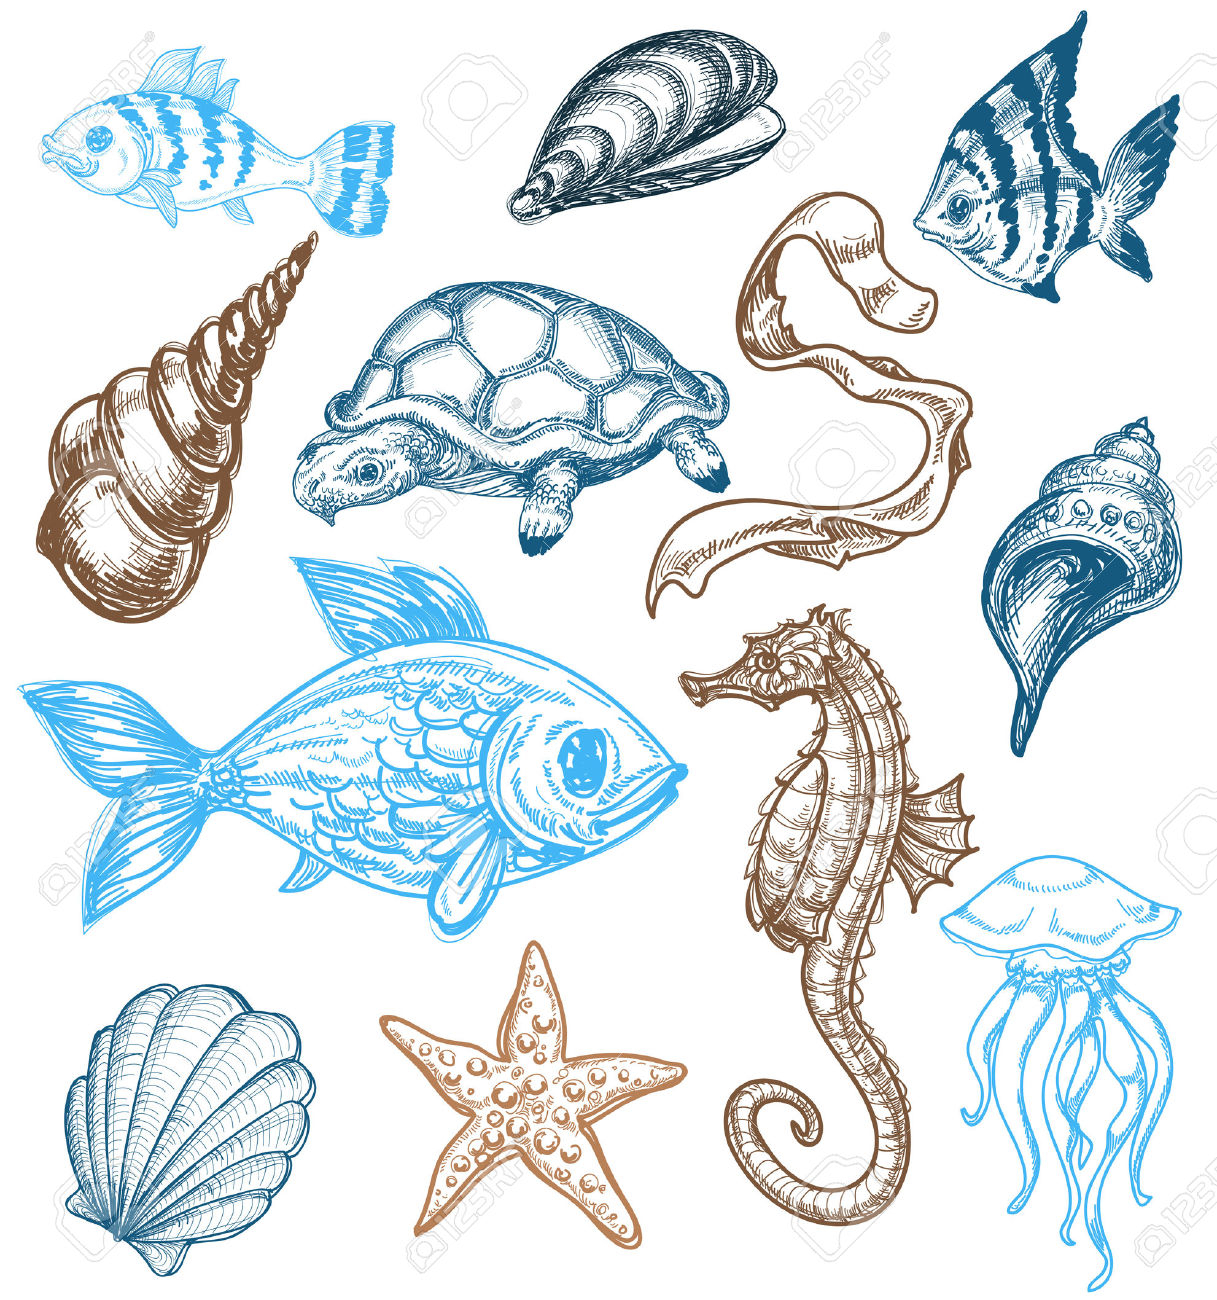 Sea Creatures Drawing at GetDrawings.com | Free for personal use Sea